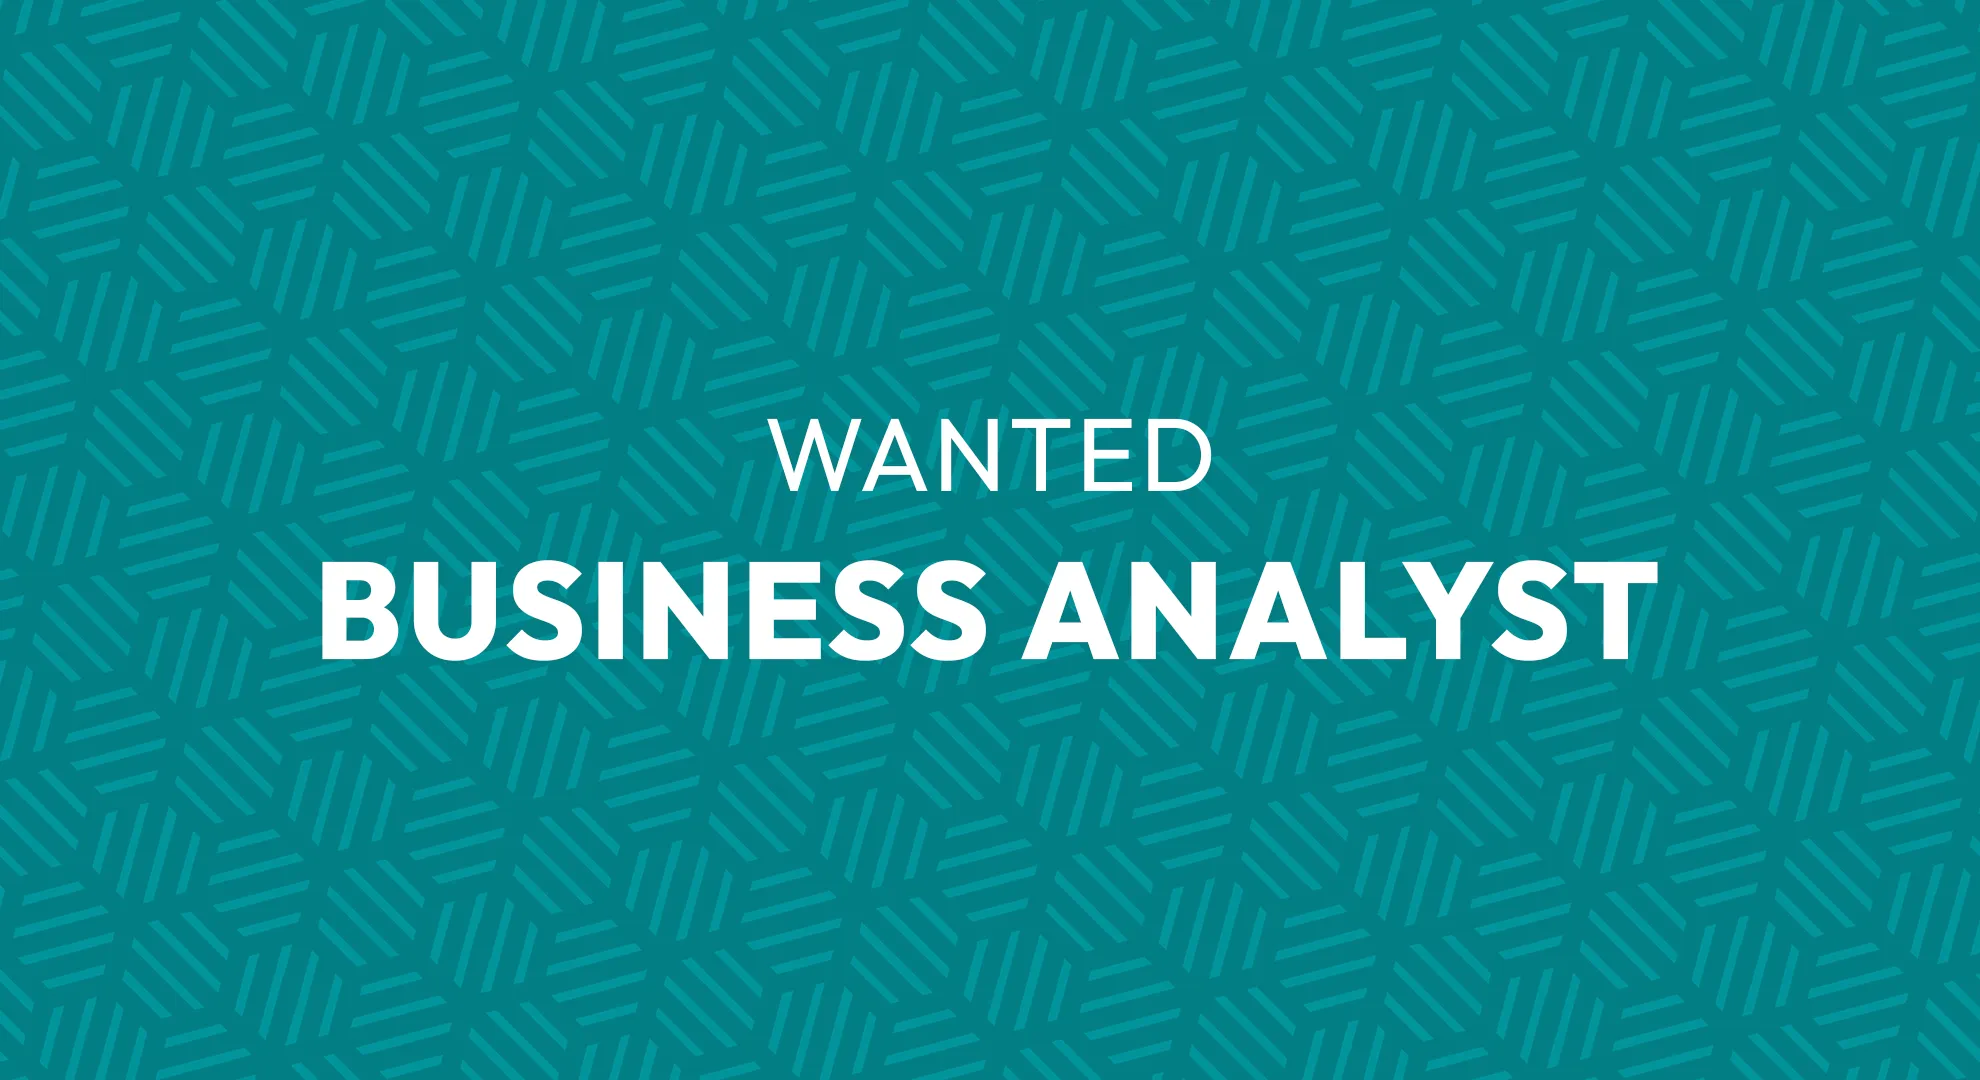 Job Opportunity: Business Analyst